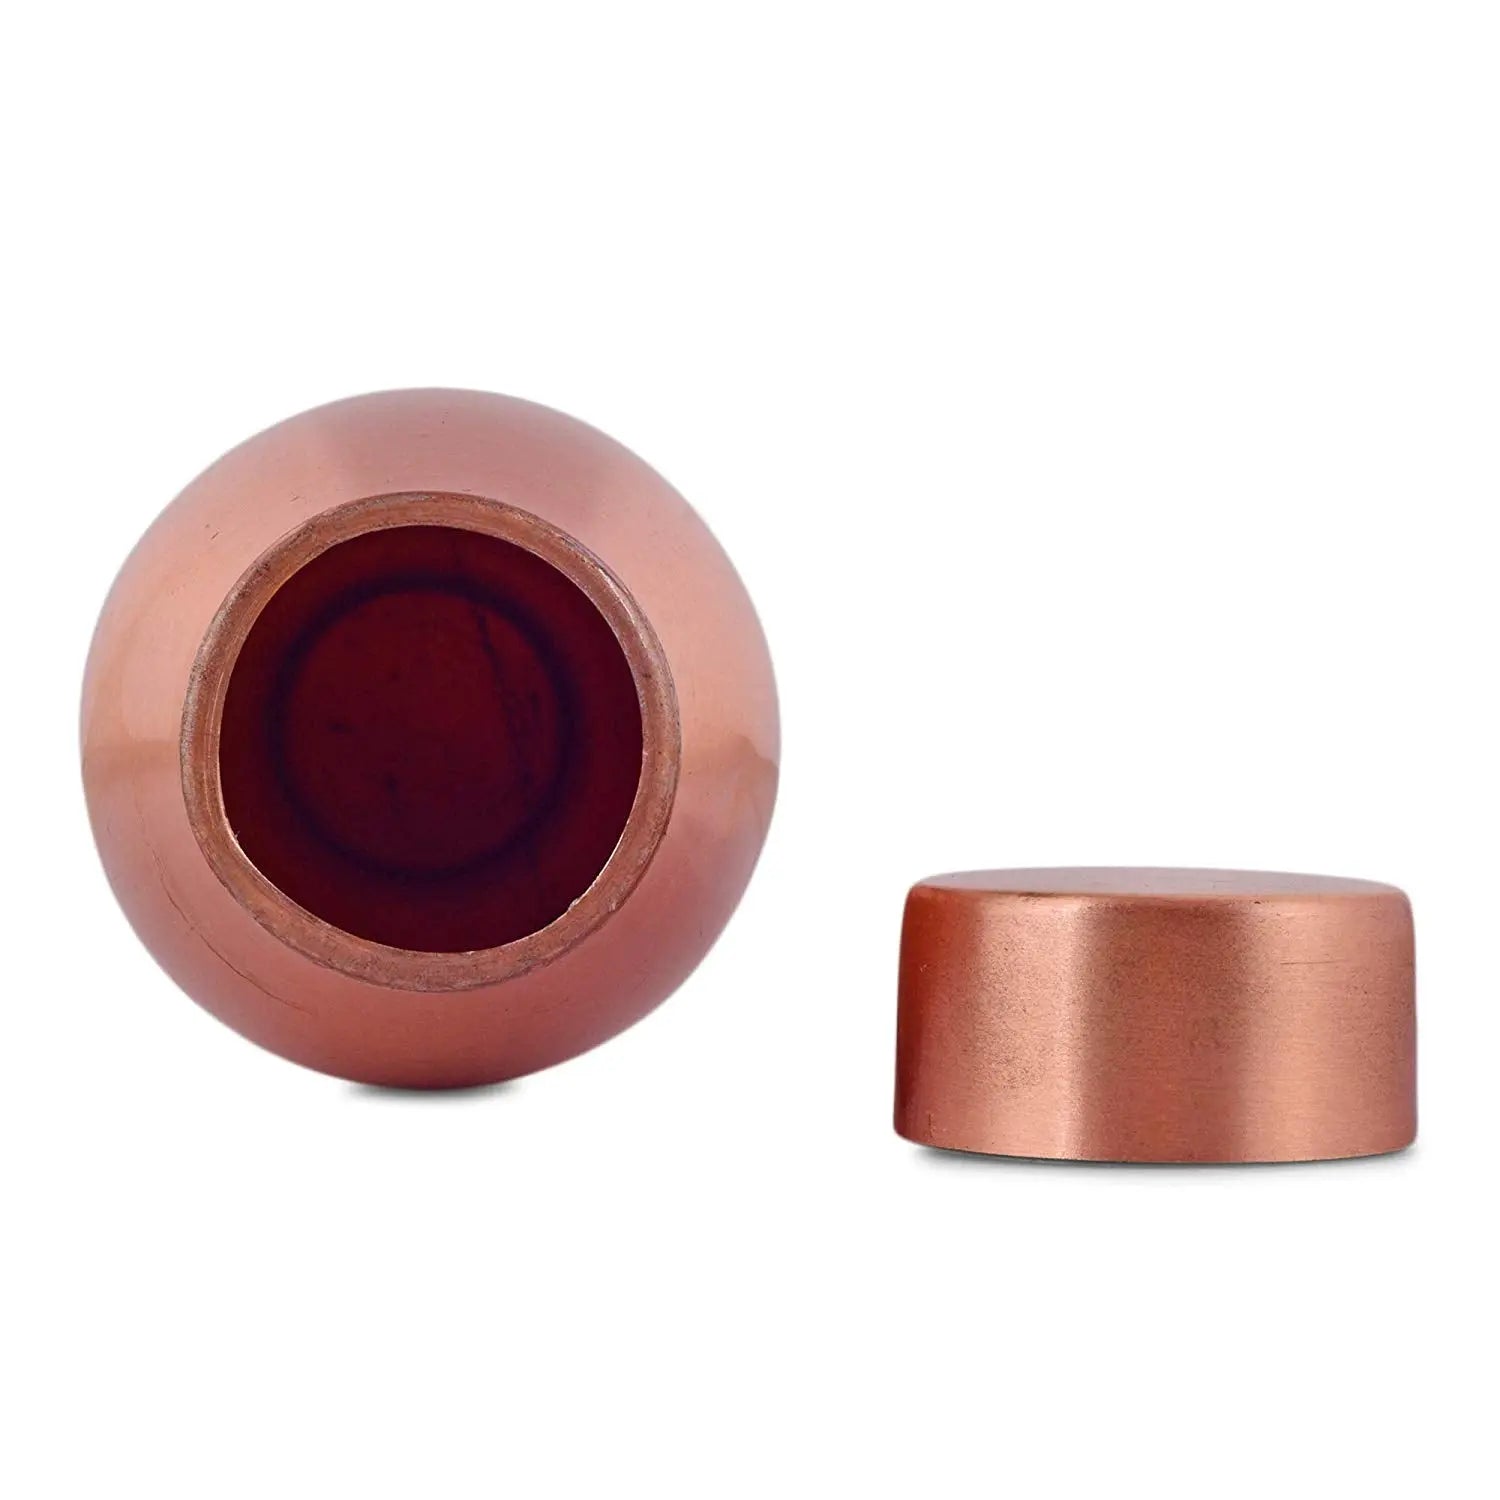 Copper Water Bottle Recommended By Doctors - CROCKERY WALA AND COMPANY 